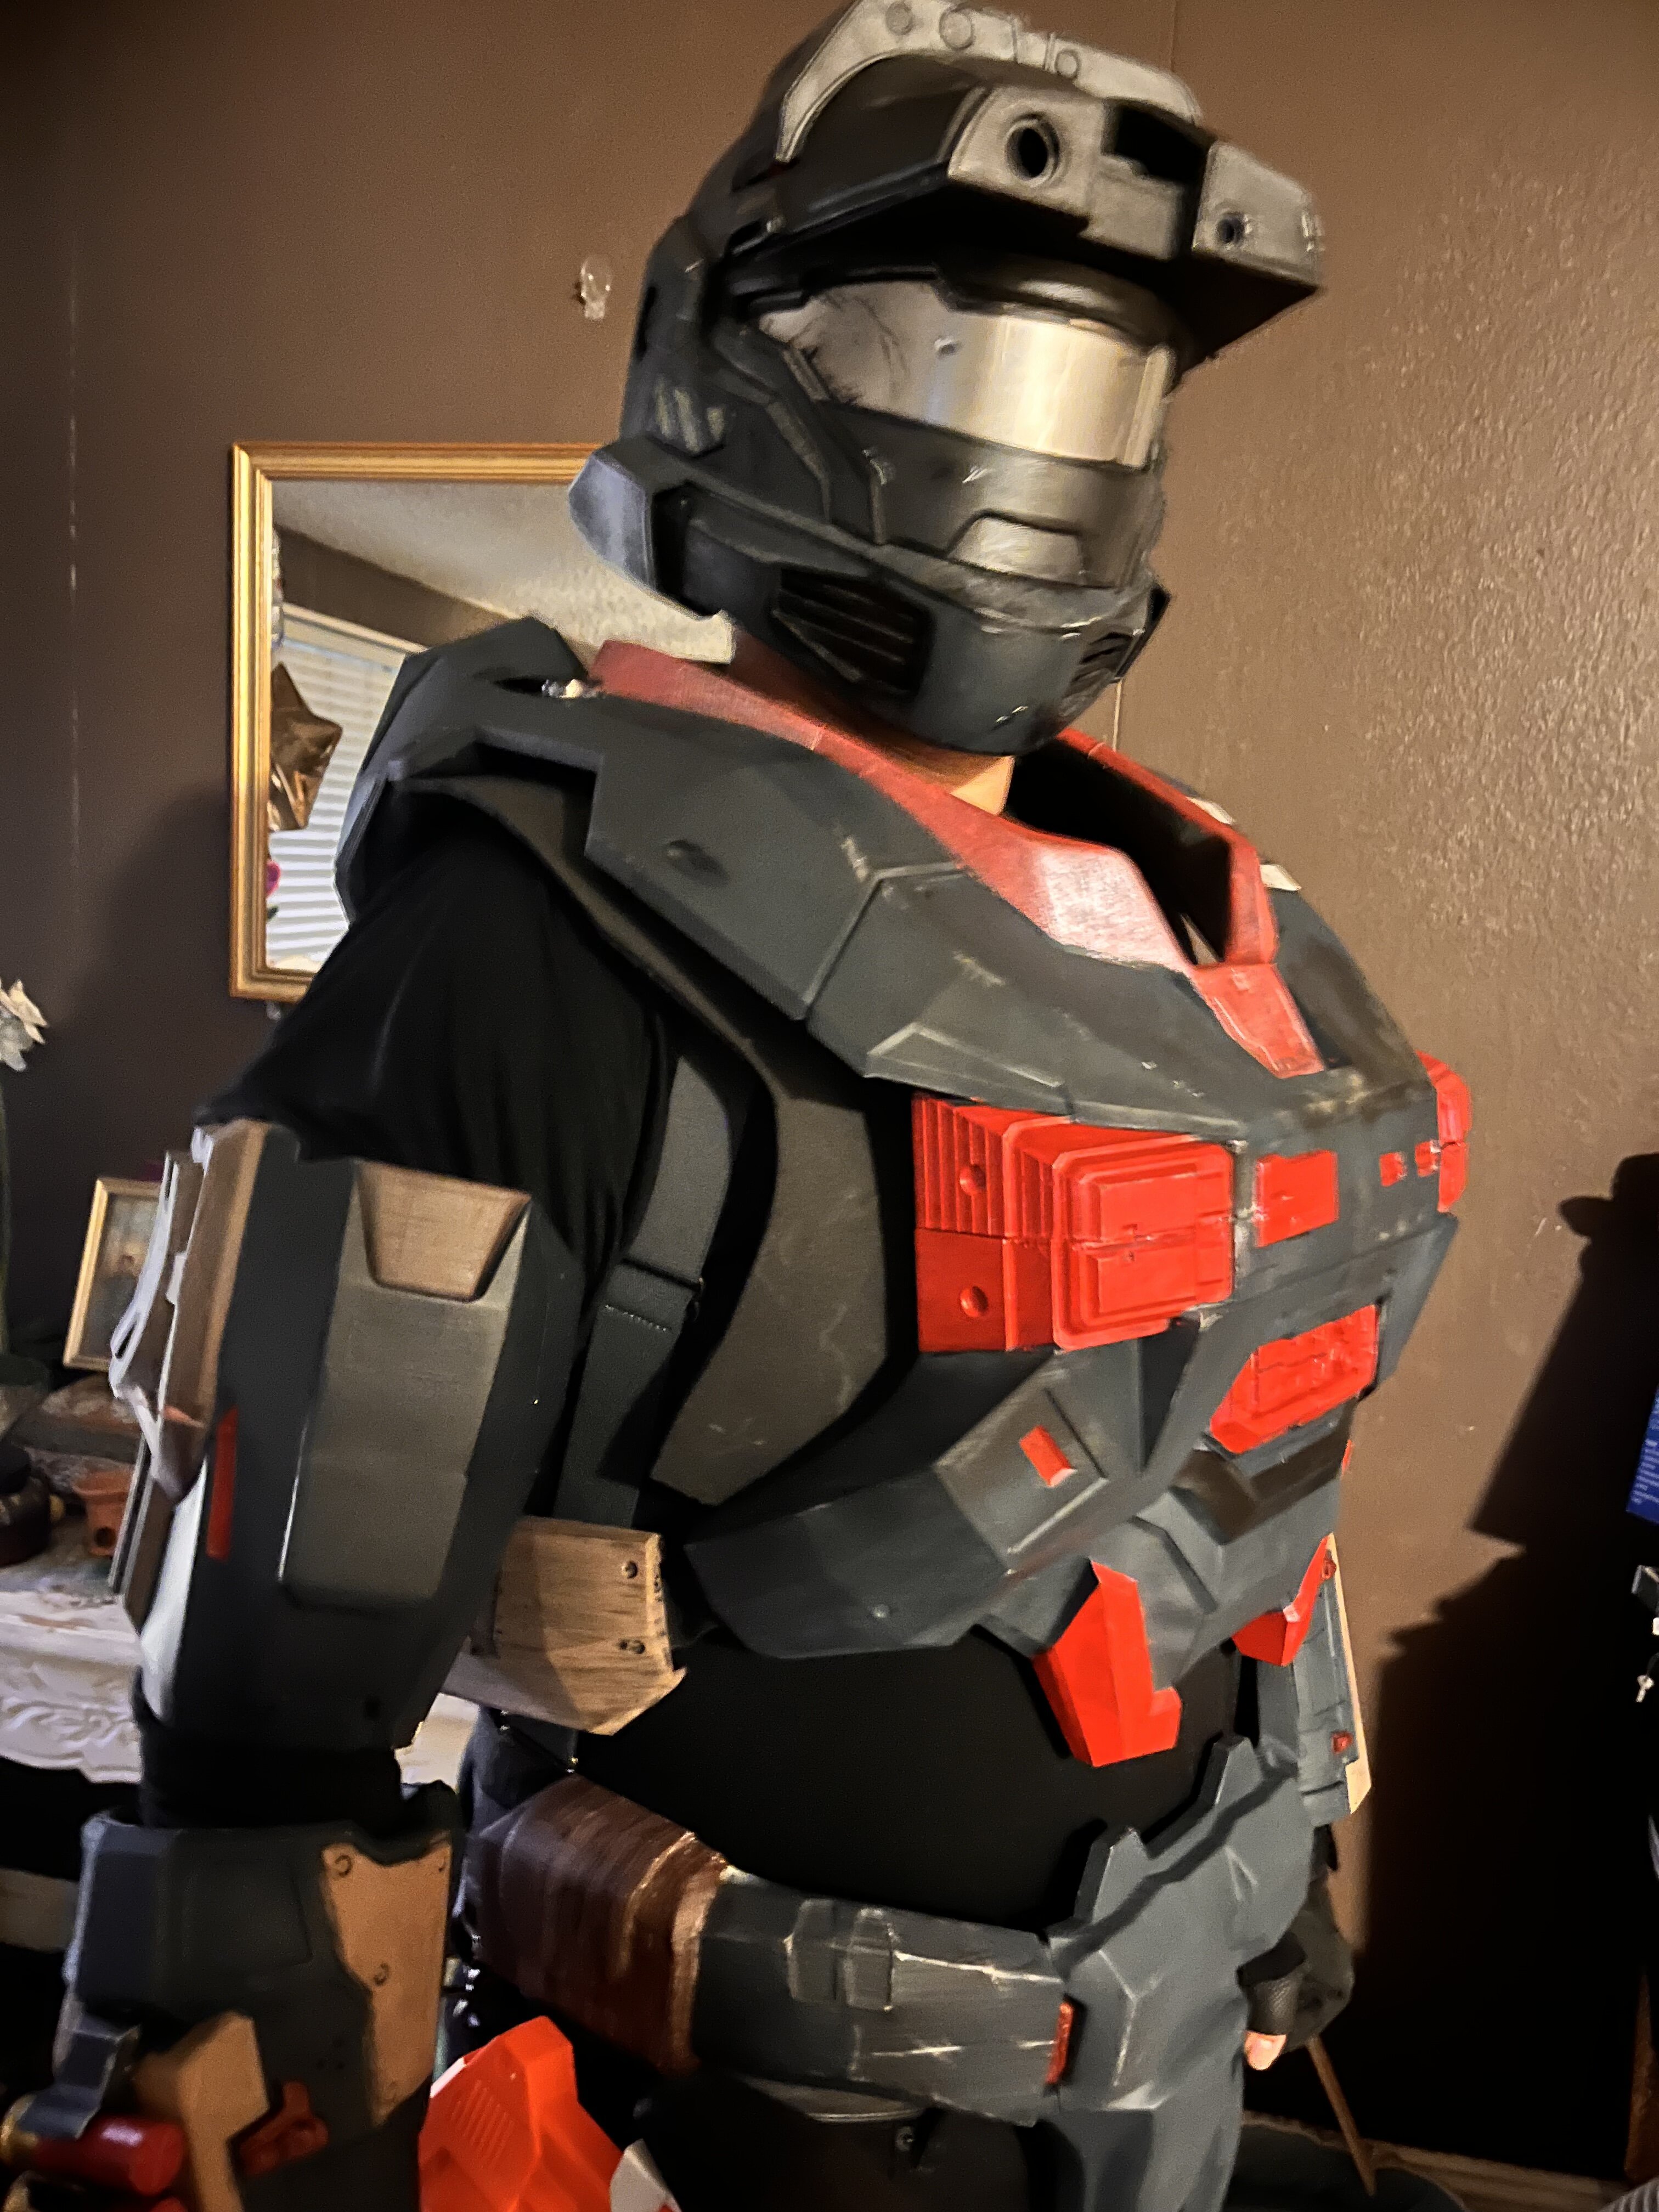 Default mk2 of my halo reach armor | Halo Costume and Prop Maker ...